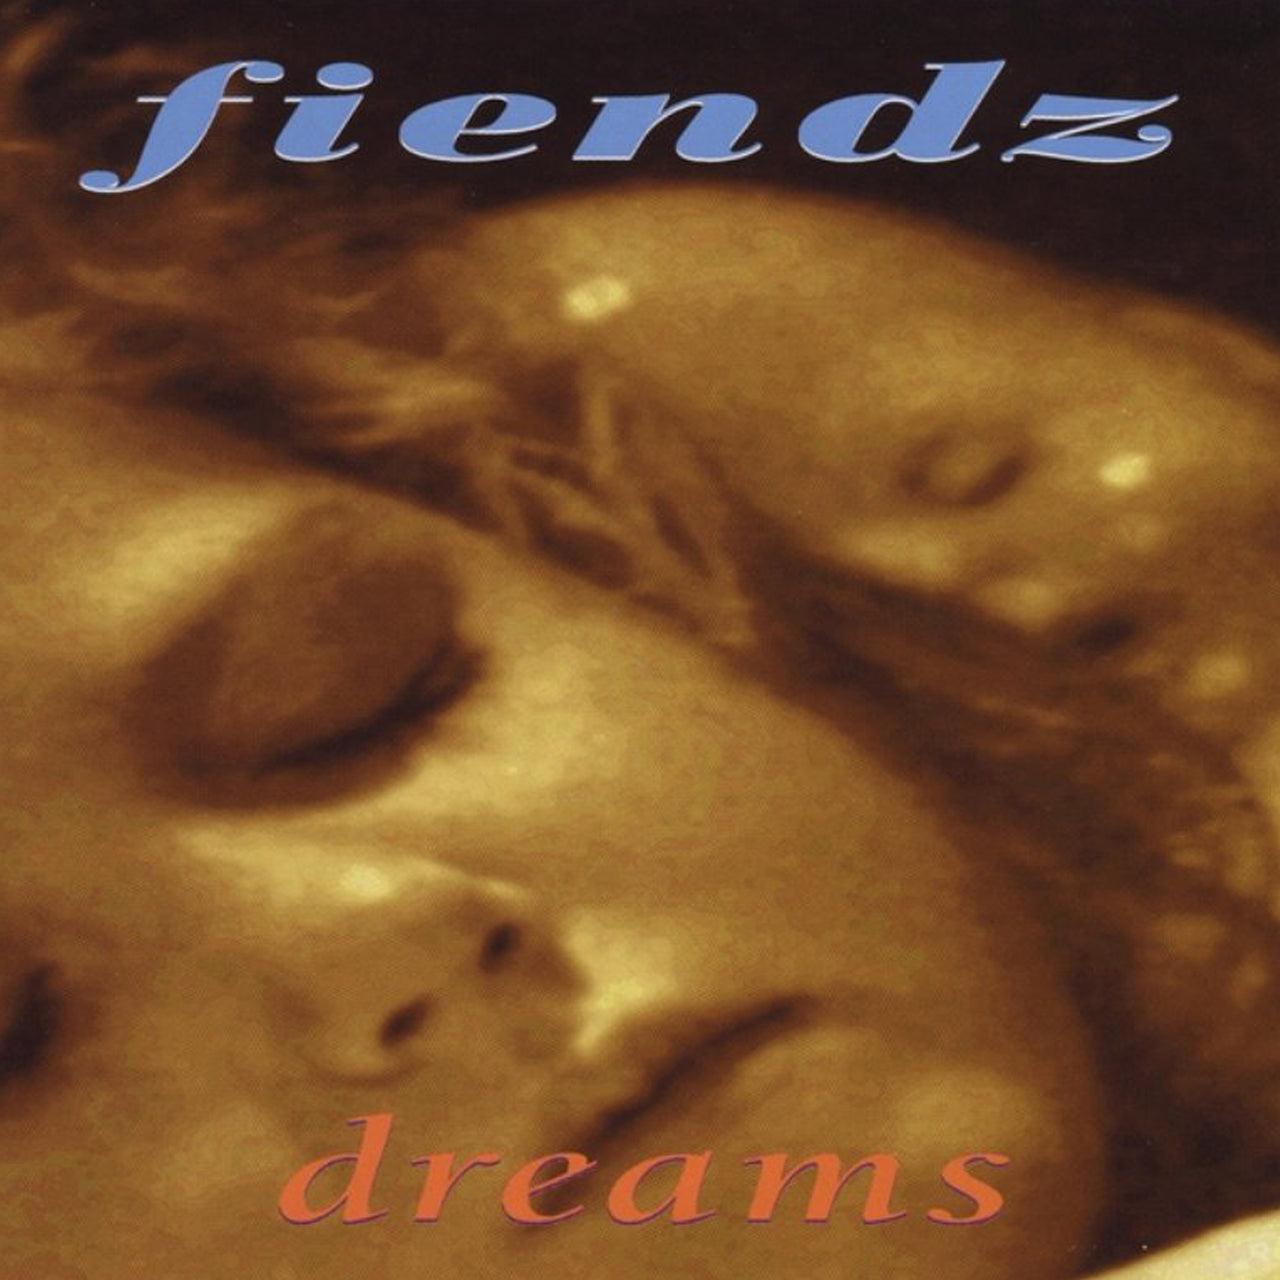 THE FIENDZ - "DREAMS" CD - INTO THE VOID Merch Co.